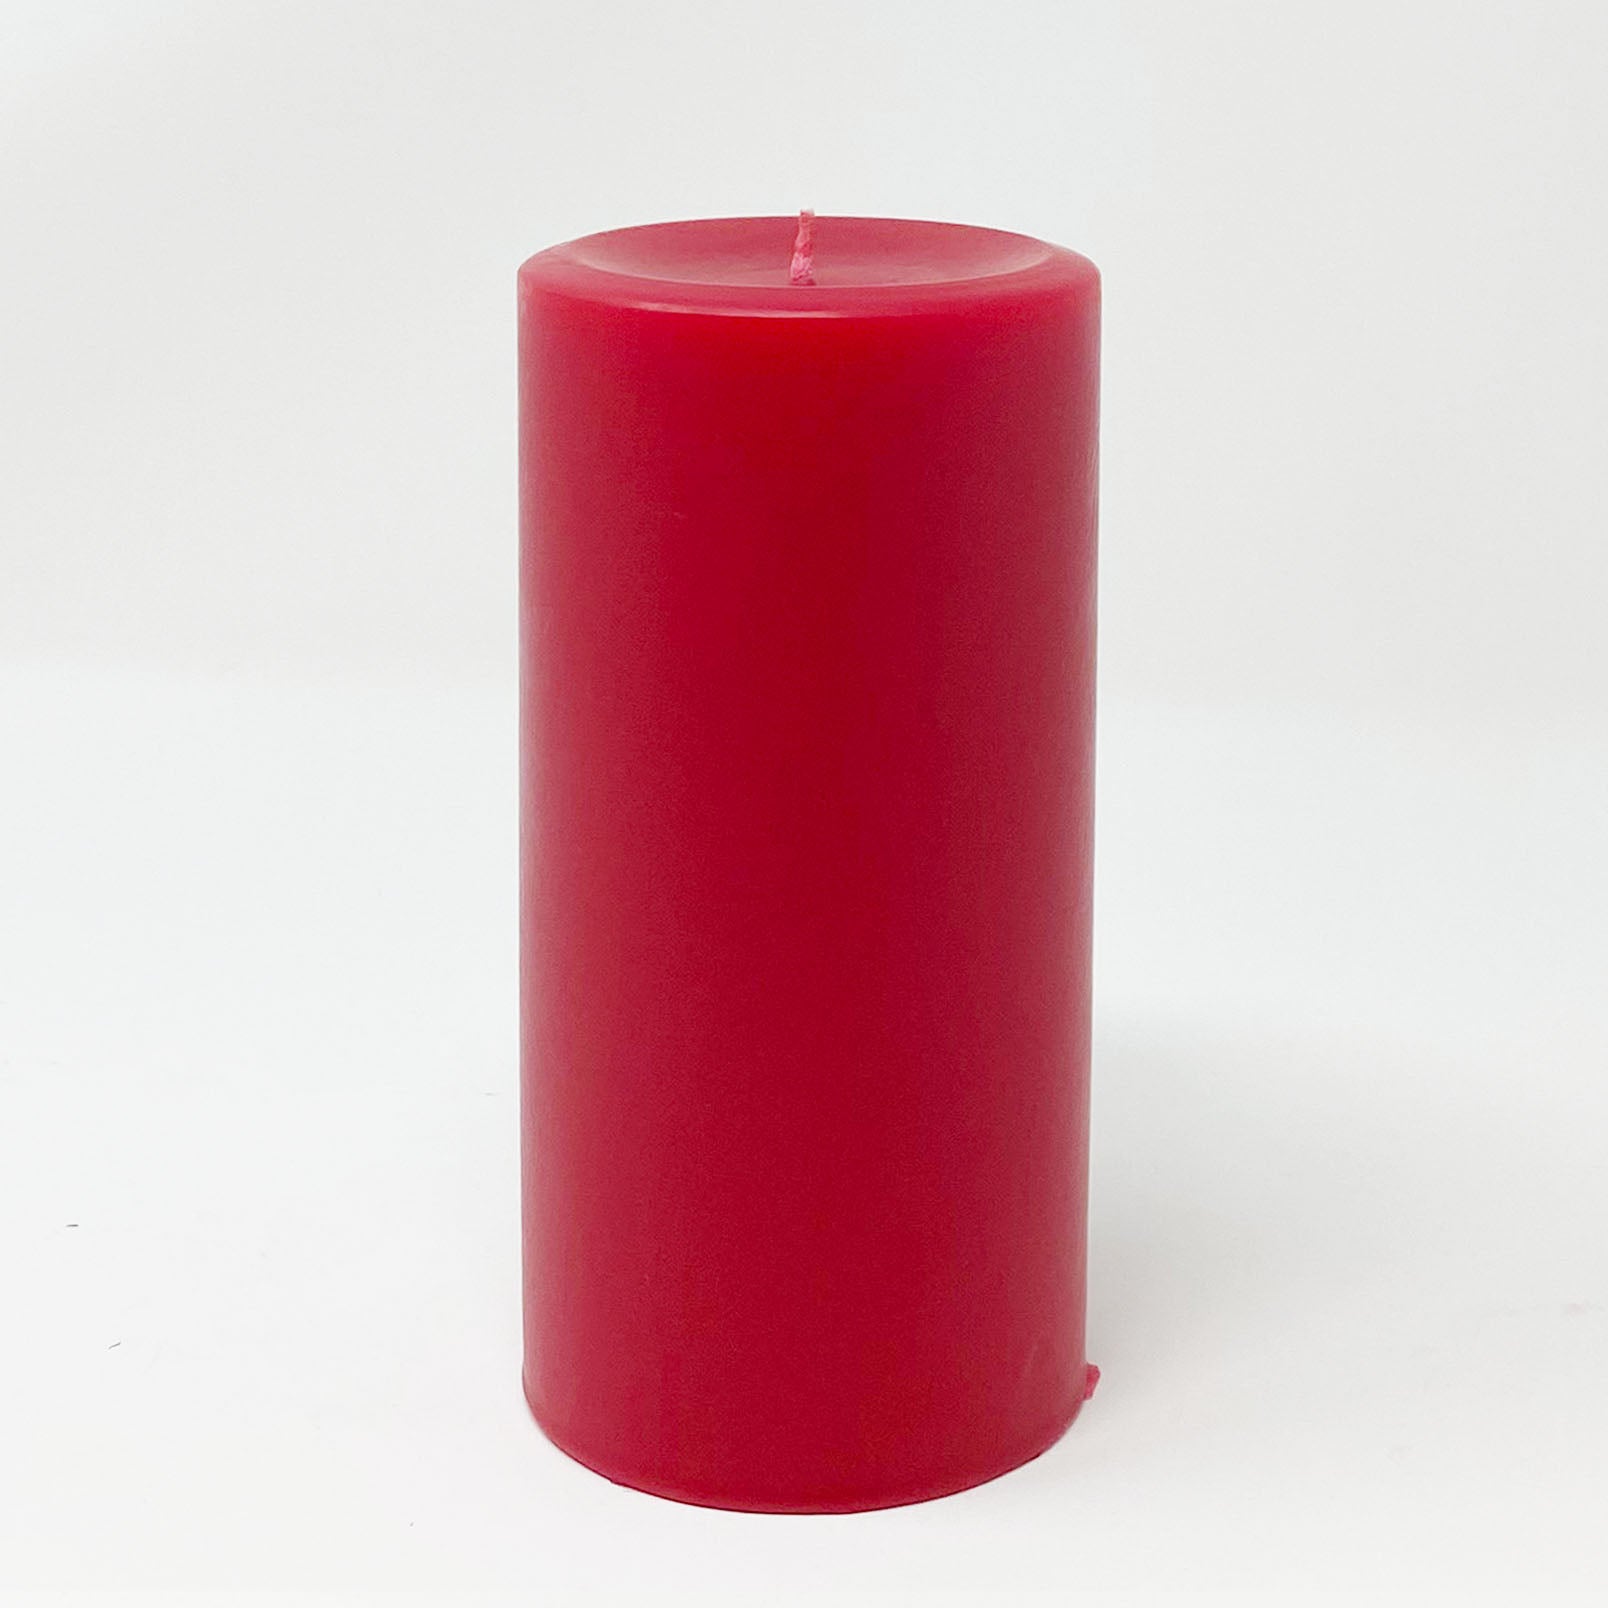 LARGE STANDING <br>HEART CANDLE MOLD <br> (6.25 HT, 1 lb 5 oz)